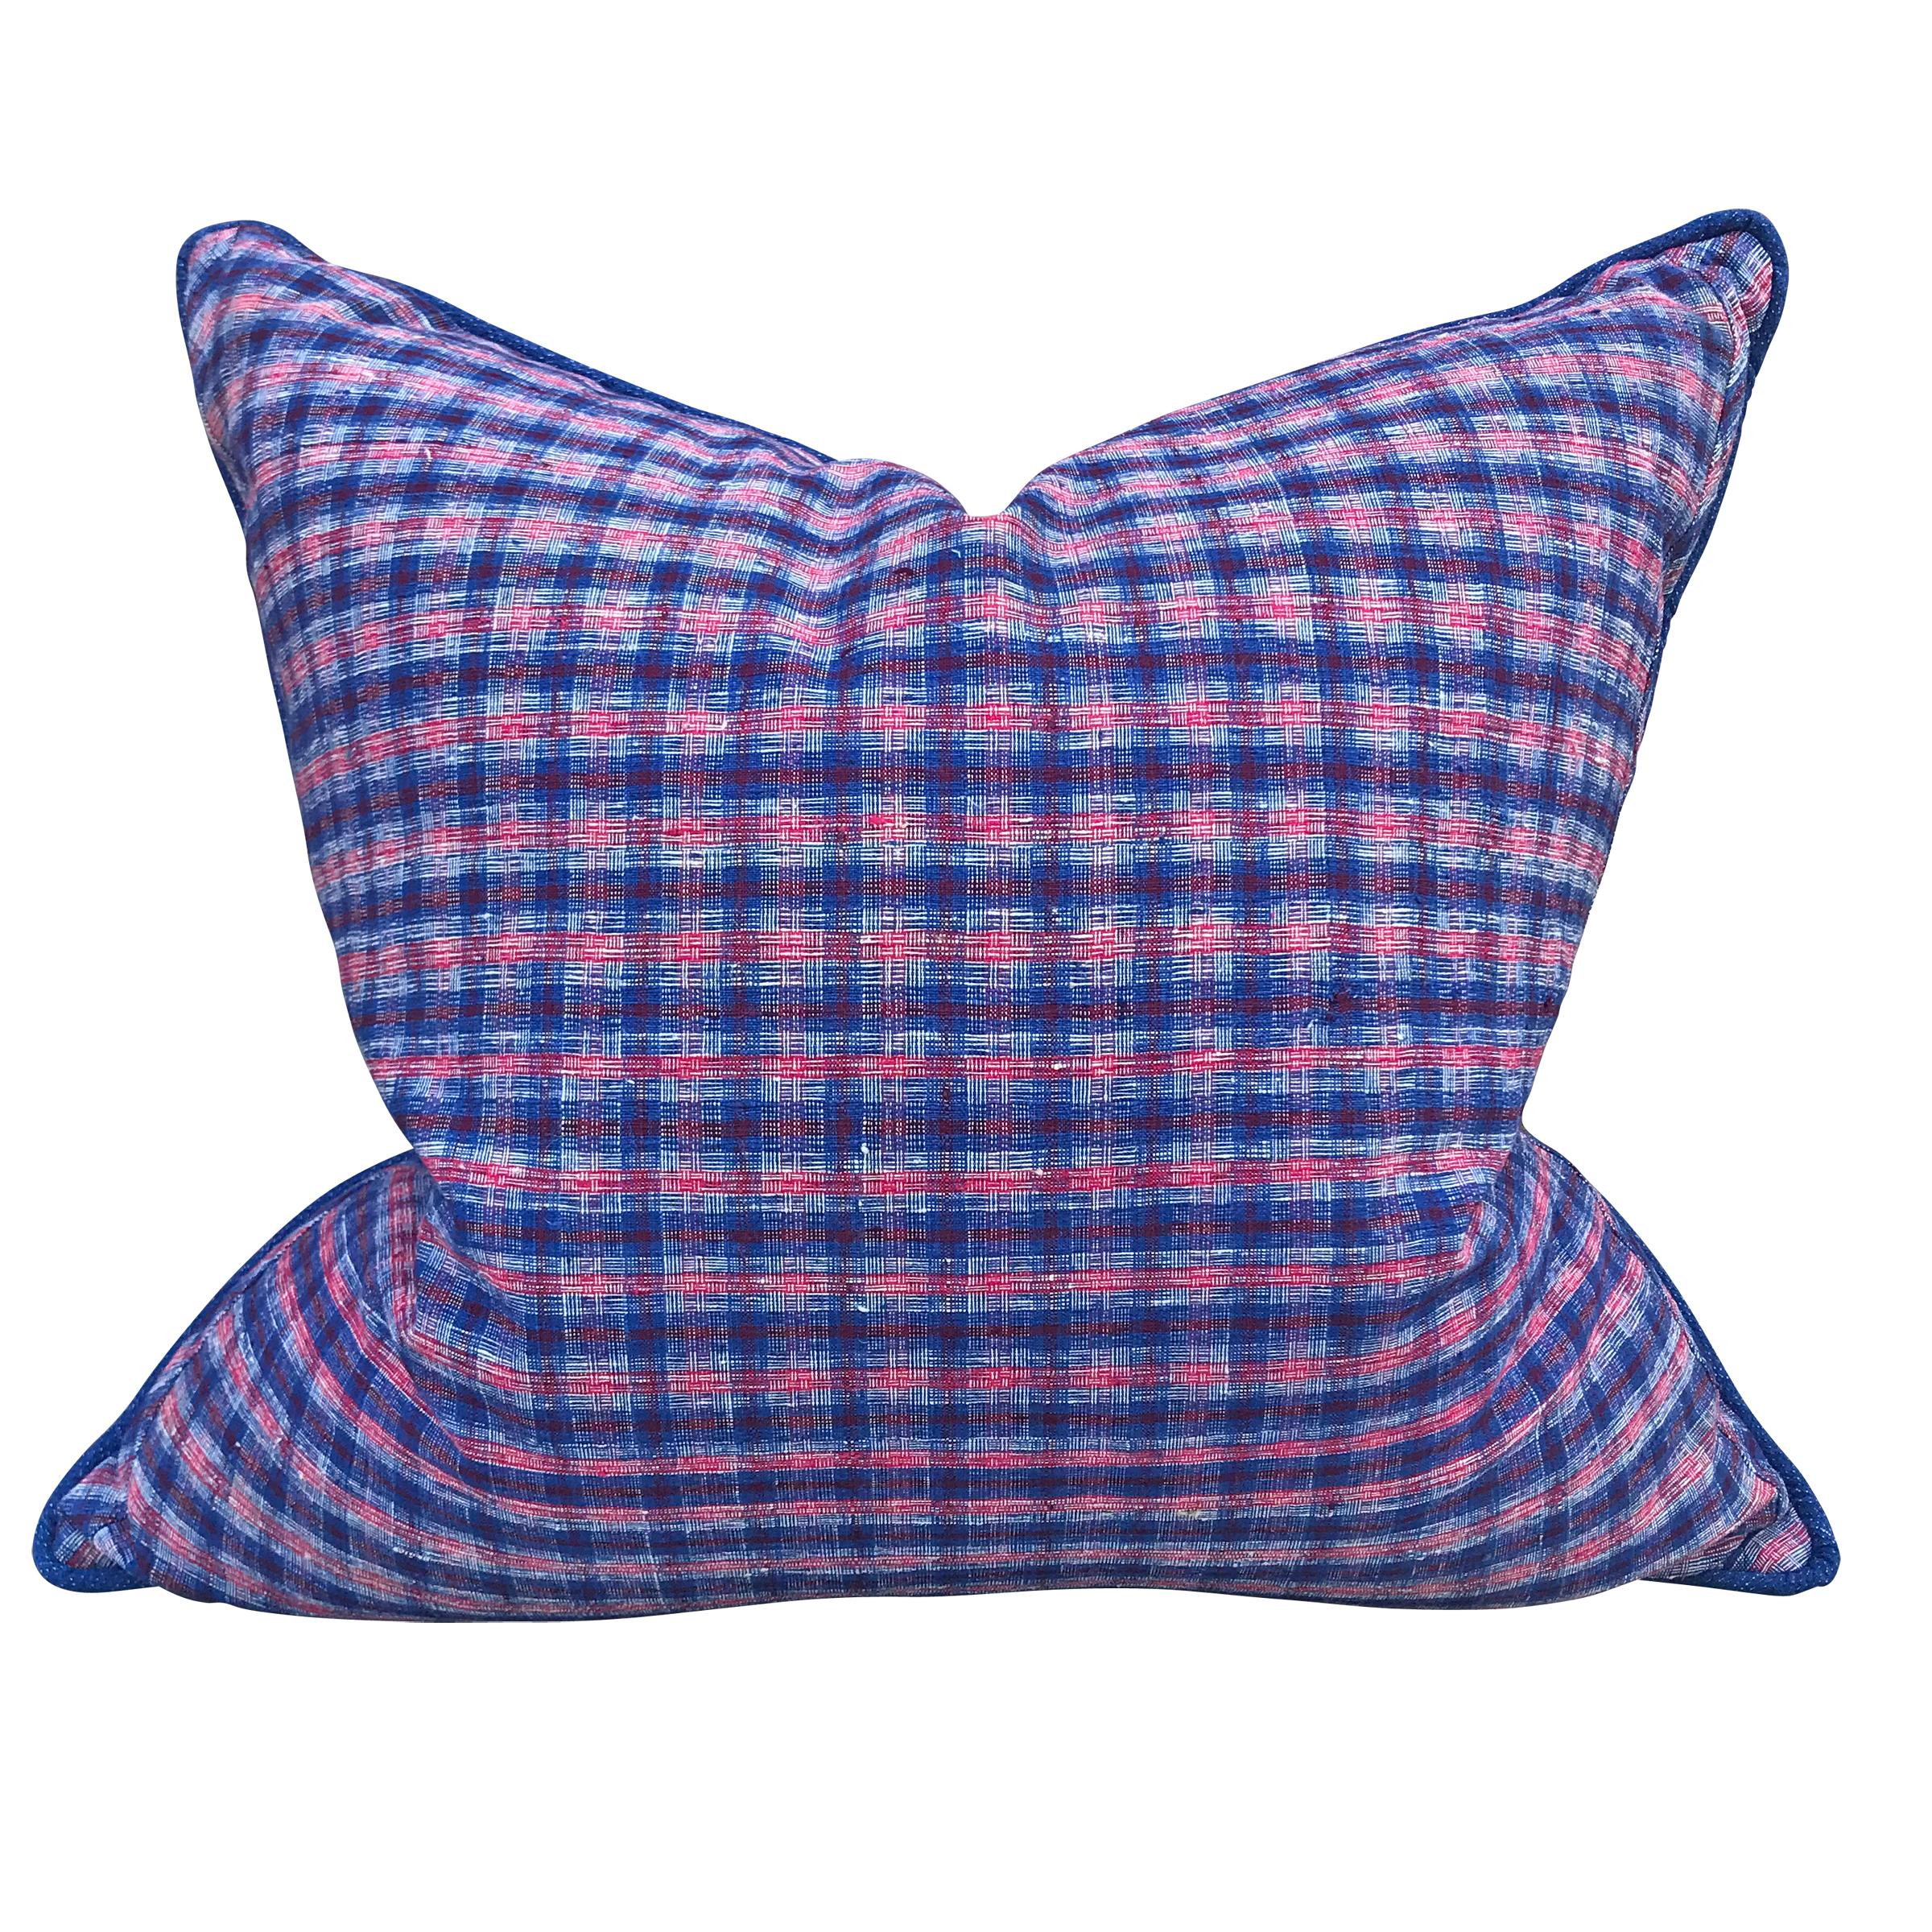 A pair of pillows made from vintage 20th century Chinese cotton panels with an indigo and crimson plaid pattern on one side, and a handwoven indigo cotton pattern on the reverse. With a self welt, and filled with down.